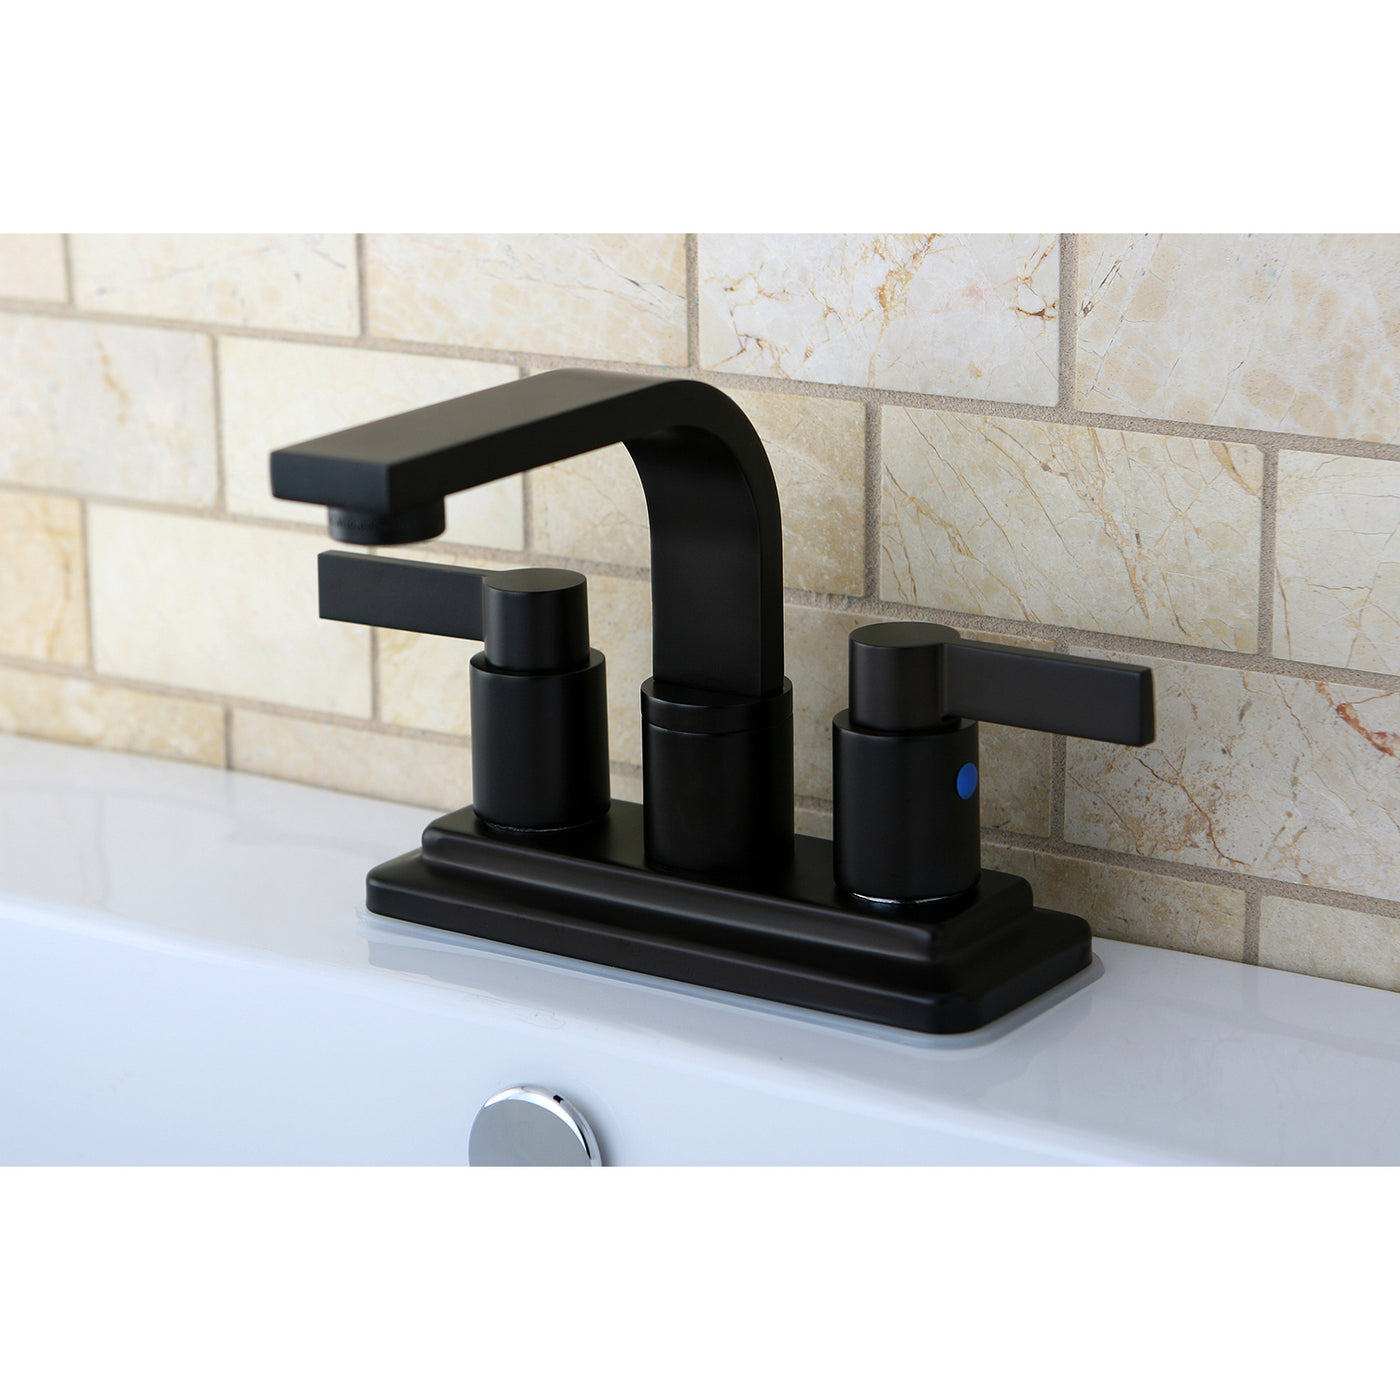 Elements of Design EB8465NDL 4-Inch Centerset Bathroom Faucet with Push Pop-Up, Oil Rubbed Bronze